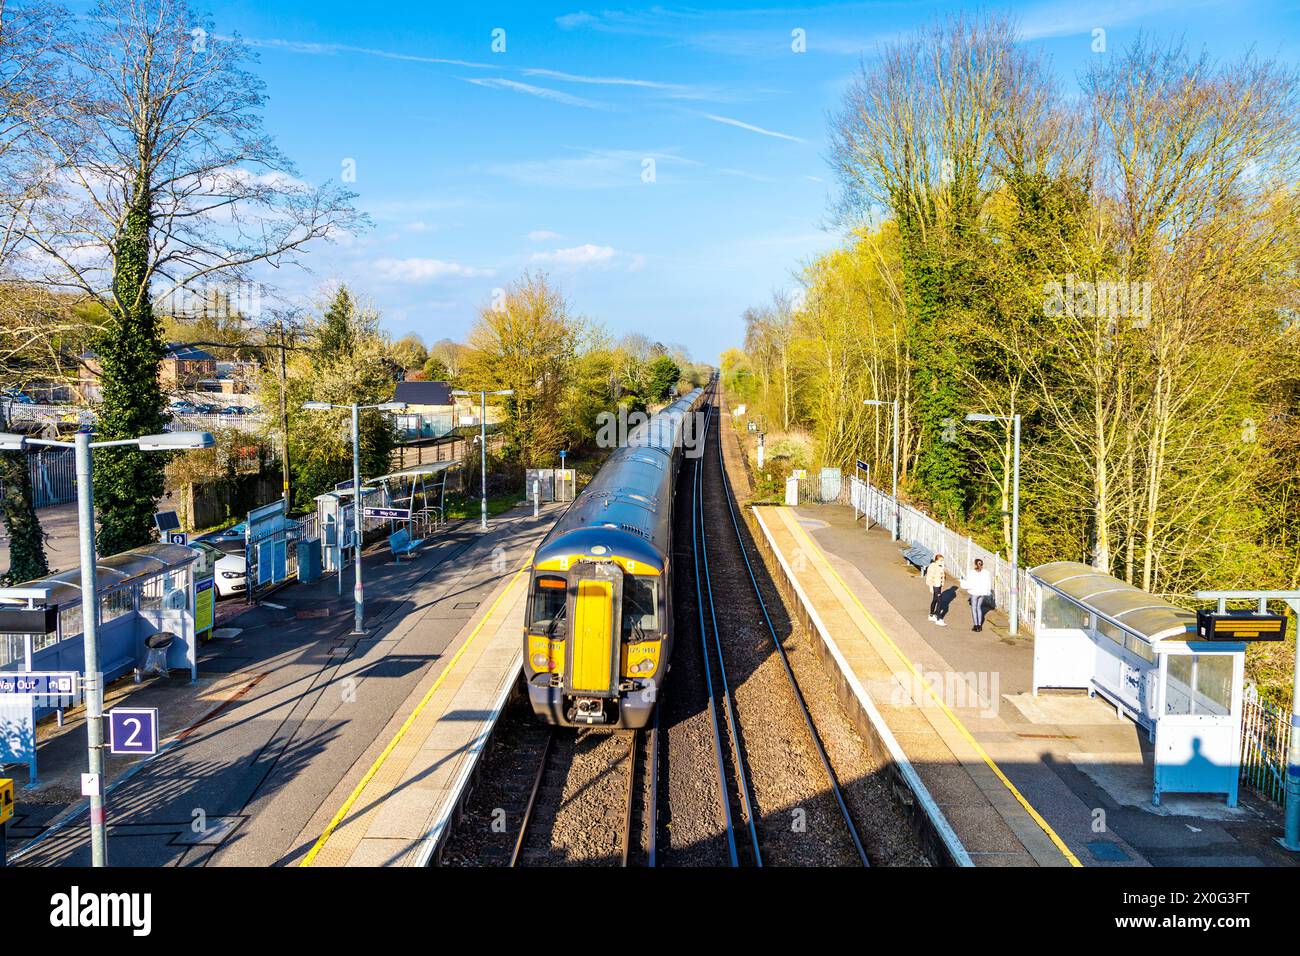 Train and platforms at Chilham Station, Kent, England Stock Photo